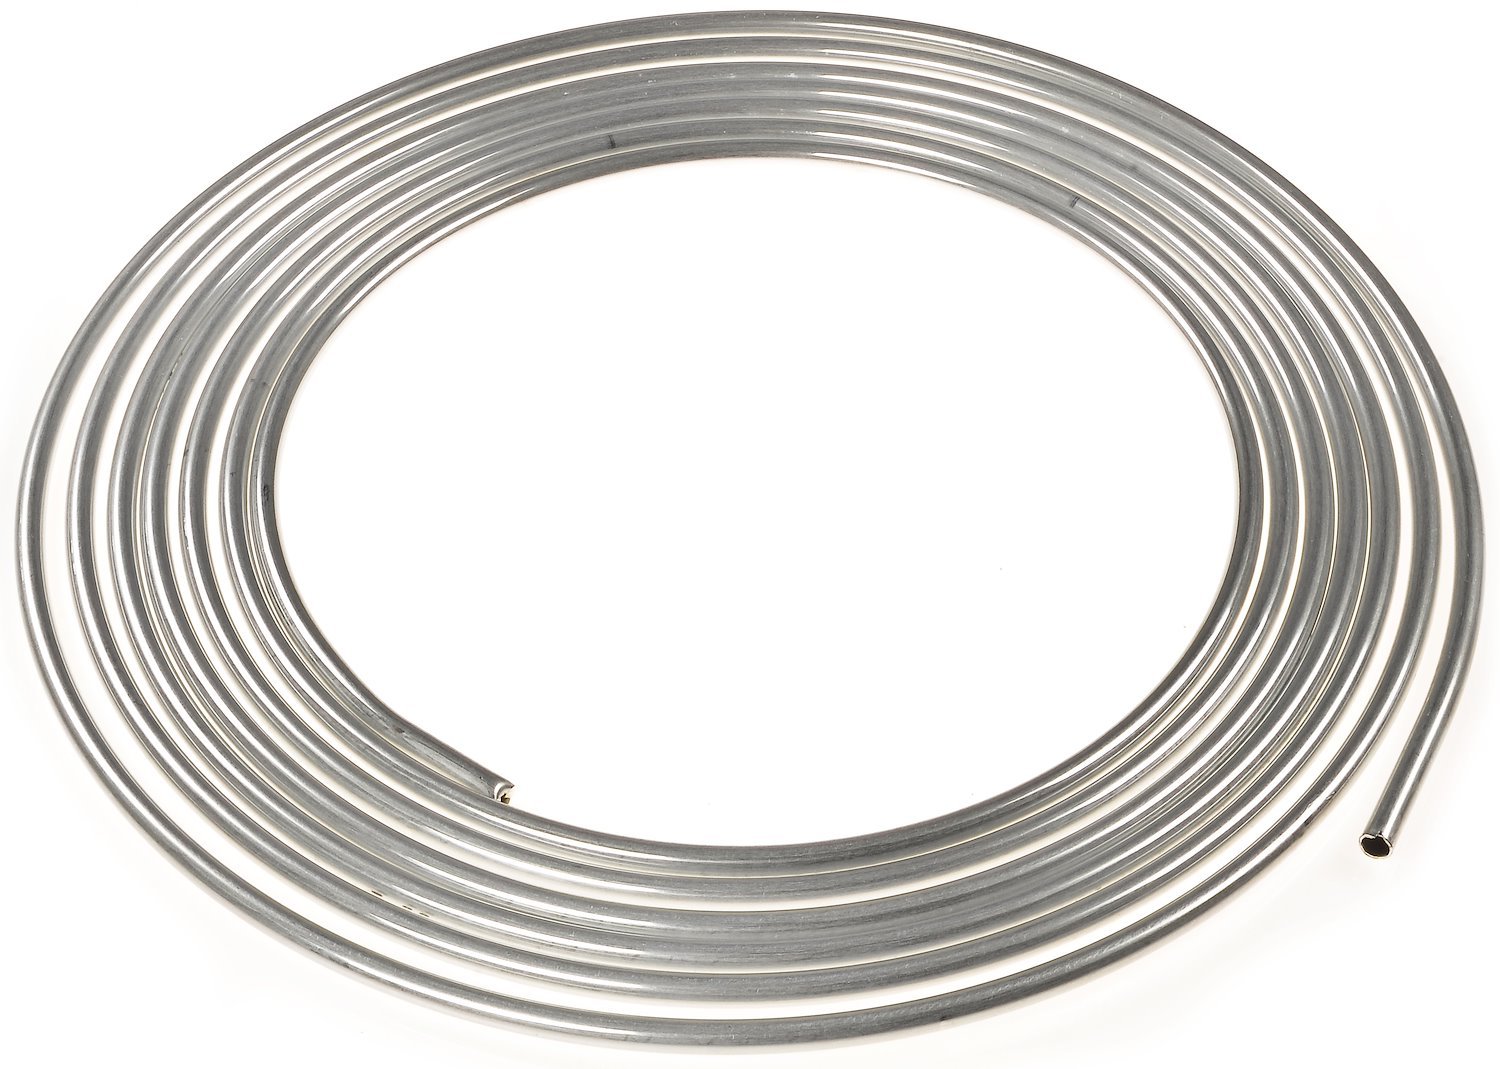 Aluminum Fuel Line [3/8 in. OD x 0.035 in. Wall]